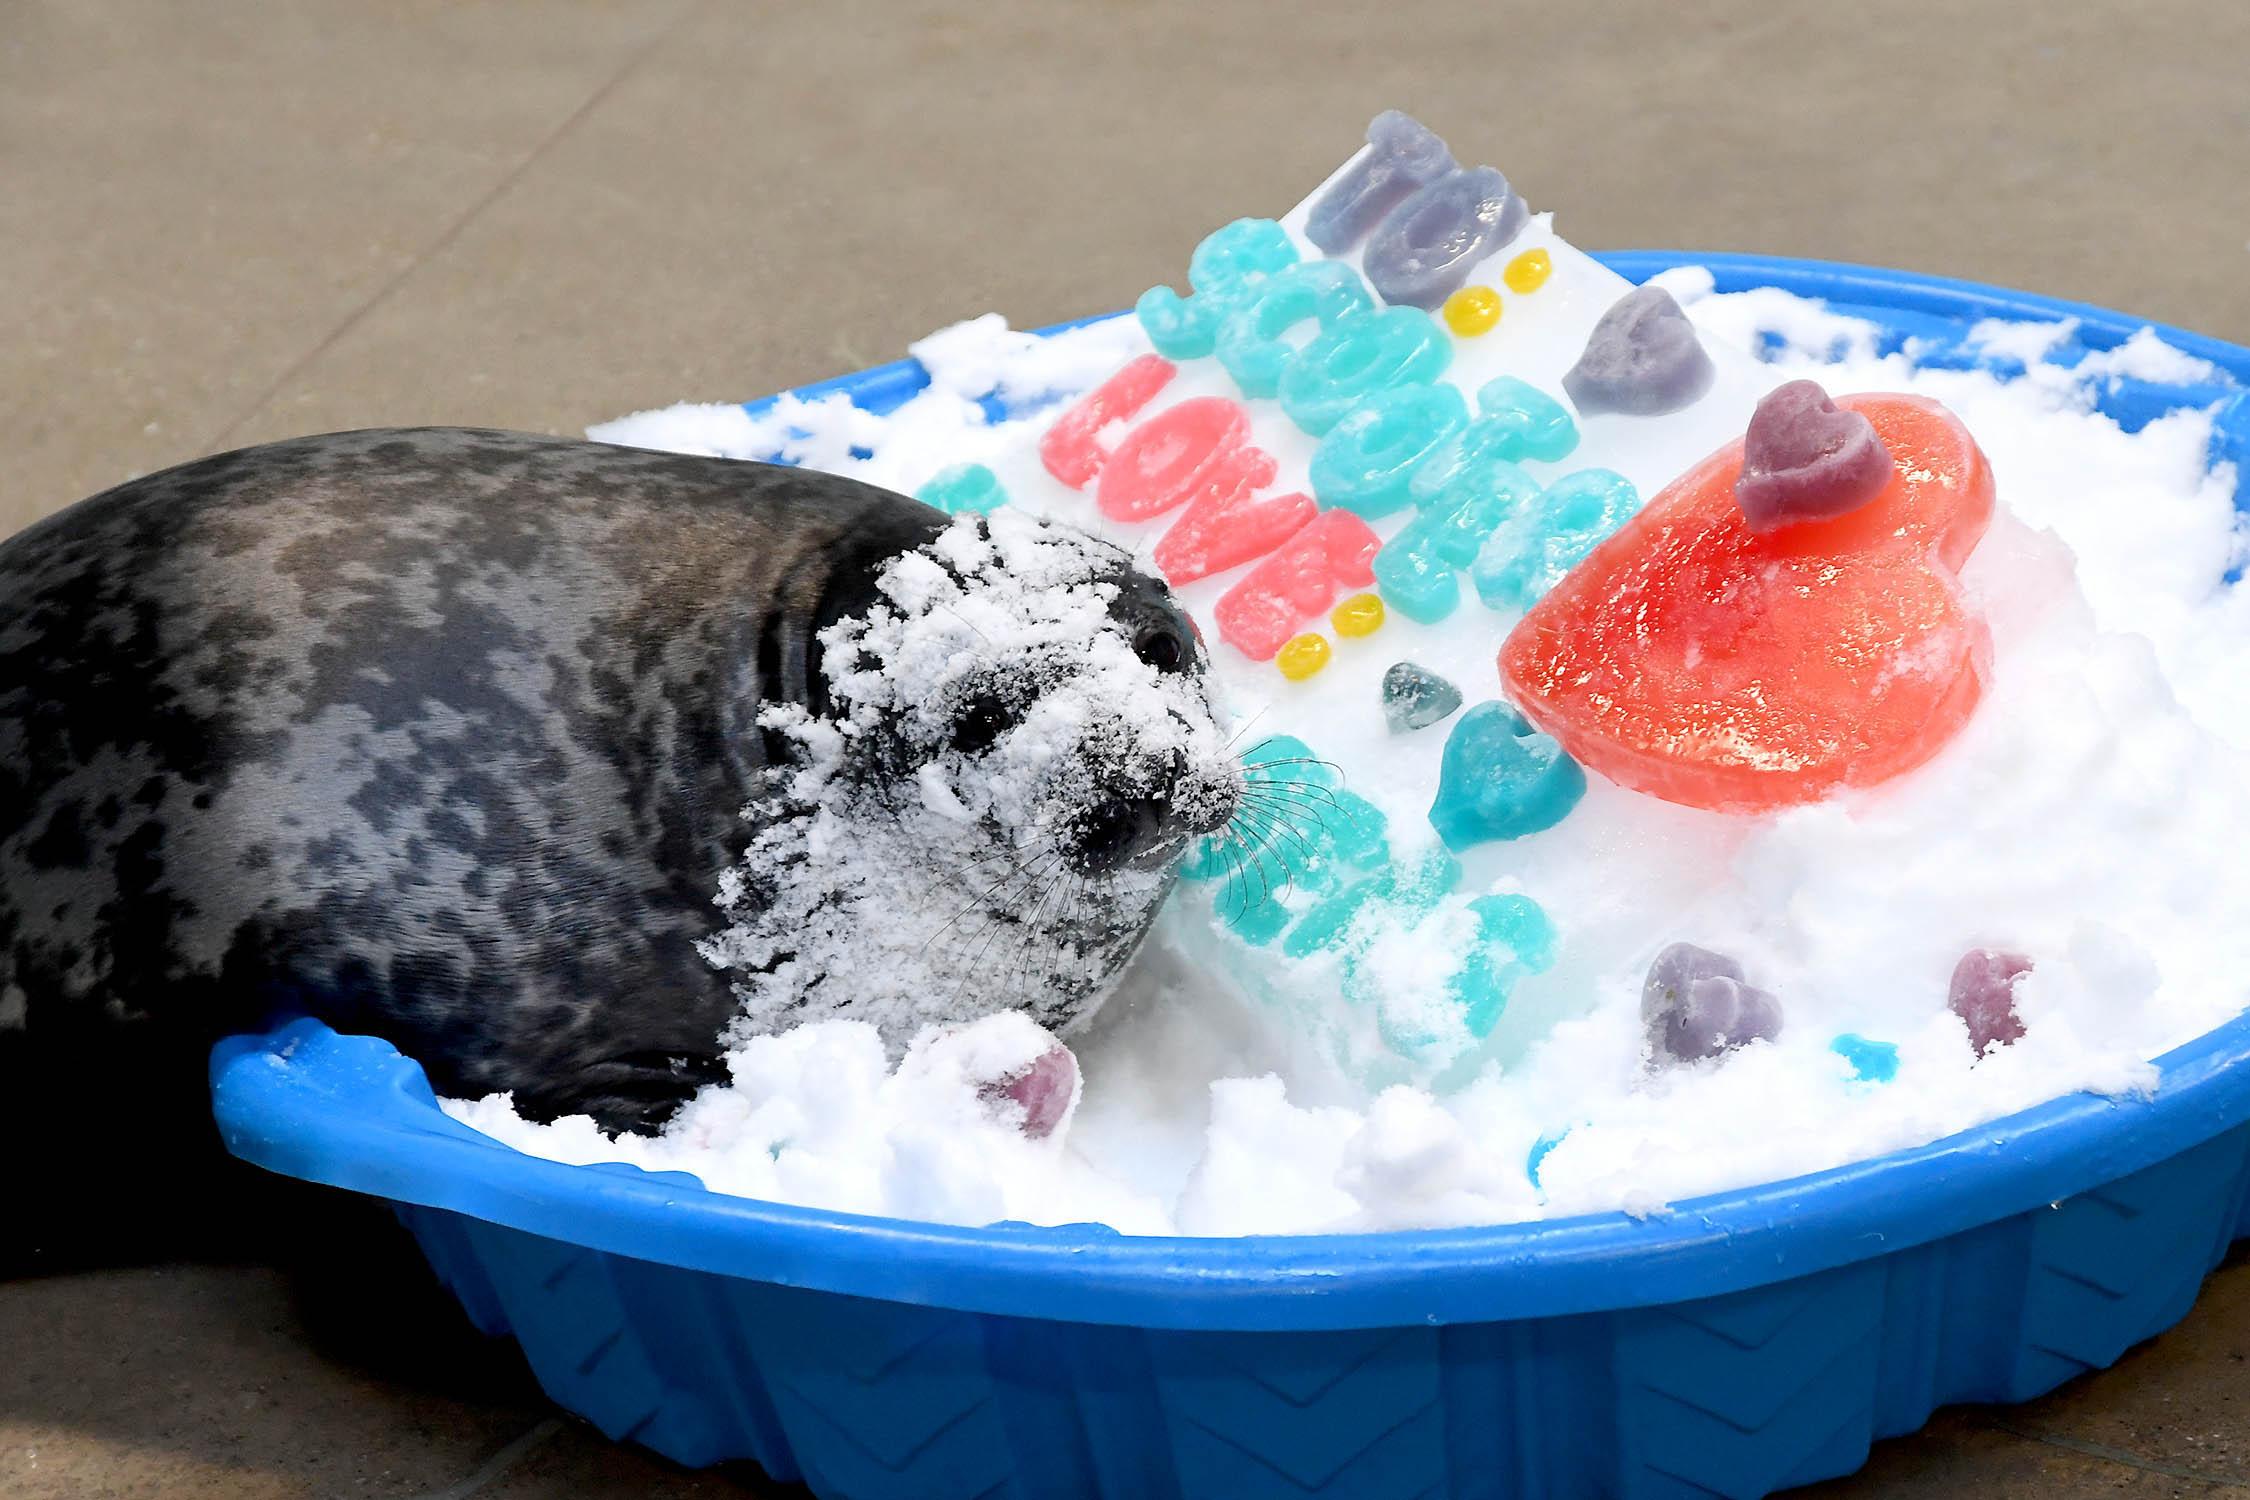 Scooter, a nearly 2-month-old gray seal at Brookfield Zoo, enjoys a Valentine's Day treat of gelatin served with a side of snow. (Jim Schulz / Chicago Zoological Society)